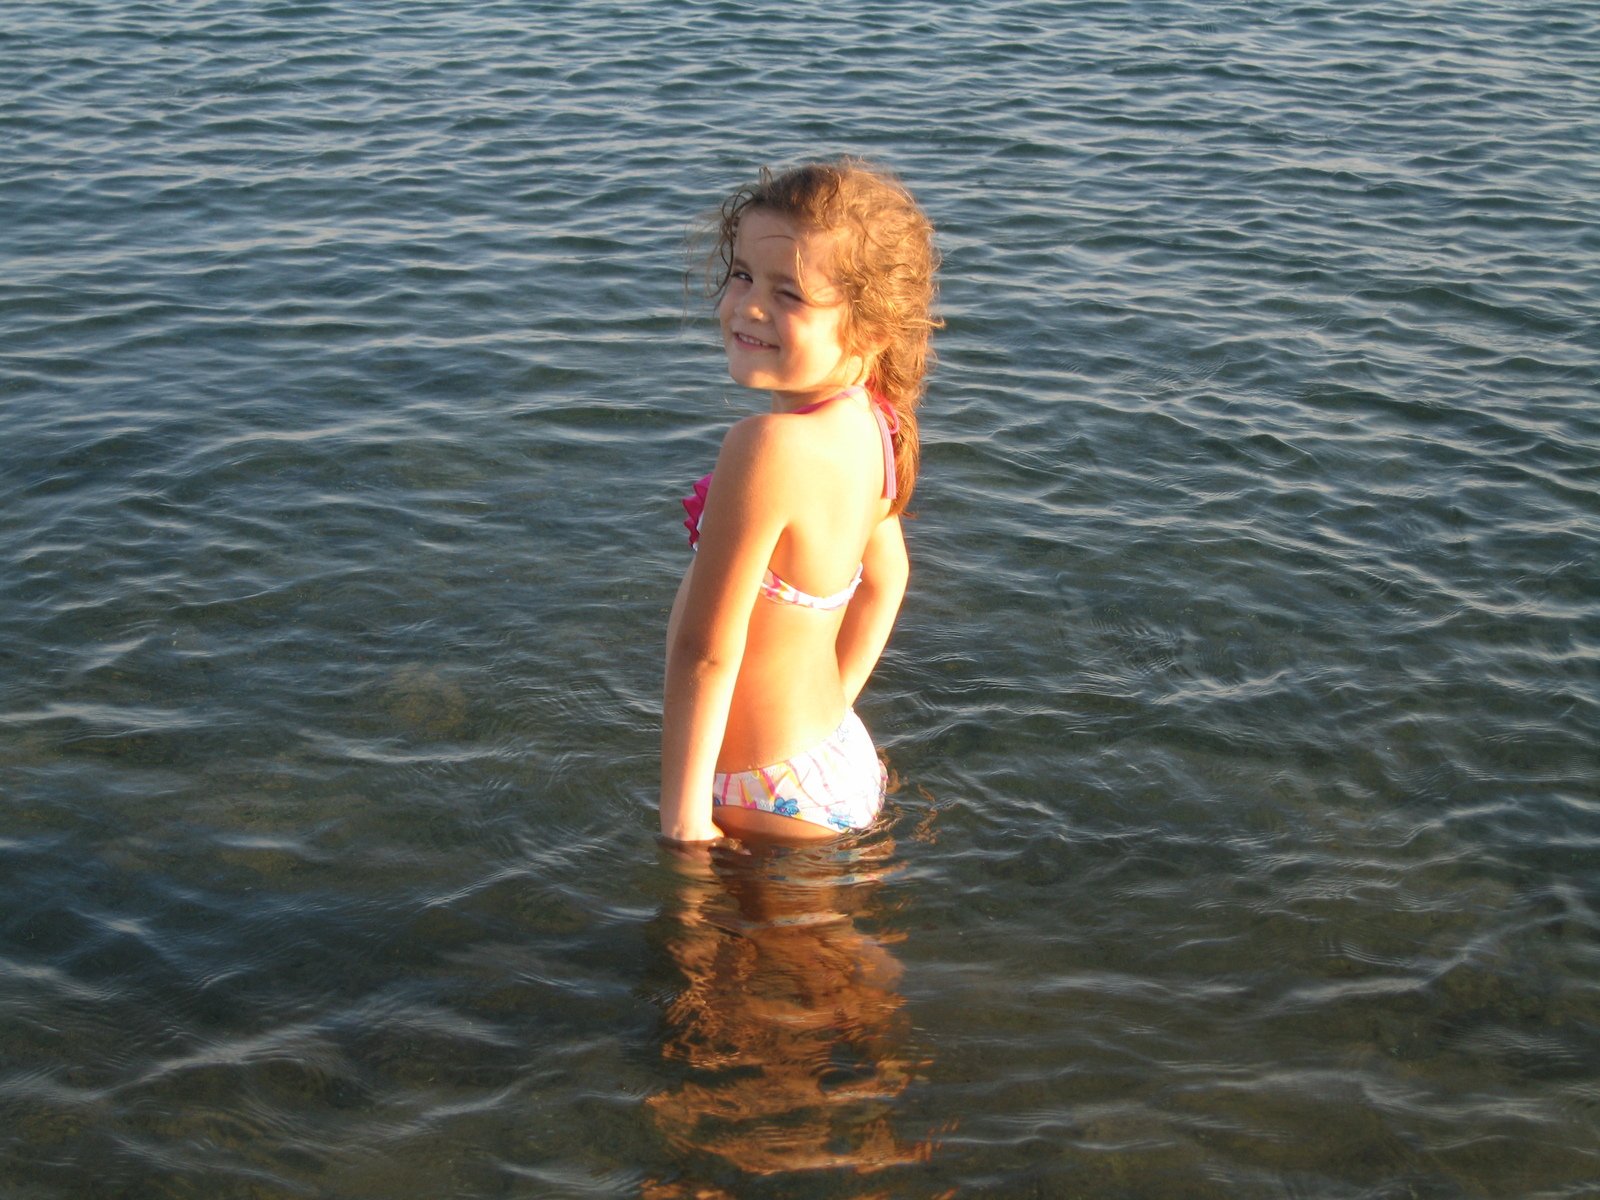 young child standing in water at beach near shore